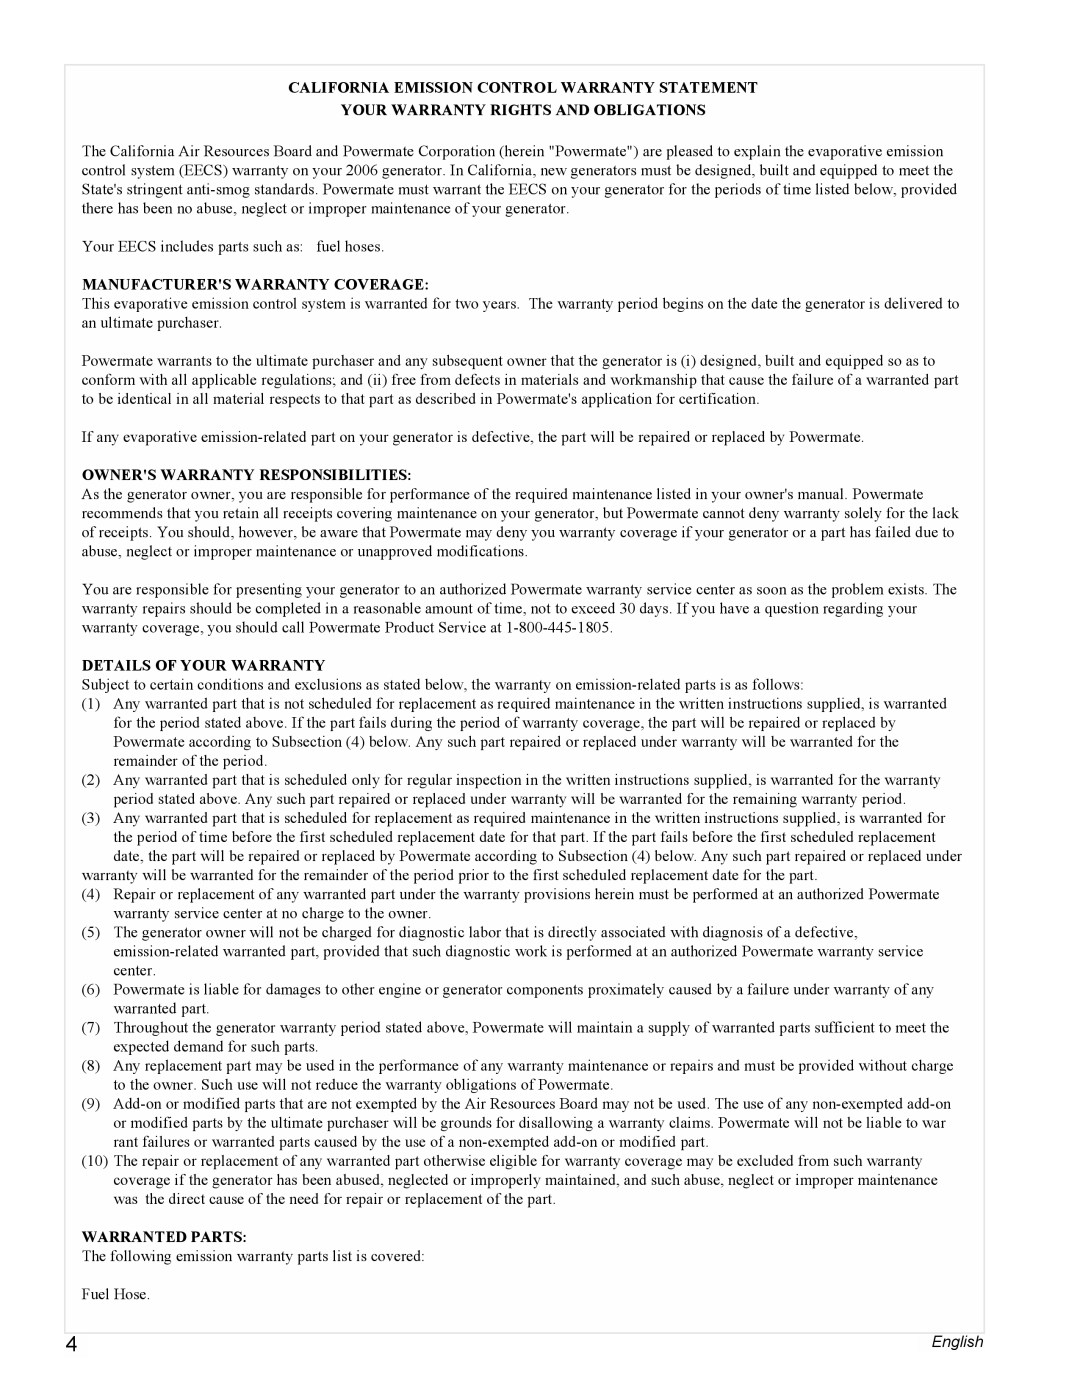 Powermate PMC497000 California Emission Control Warranty Statement, Your Warranty Rights And Obligations, Warranted Parts 